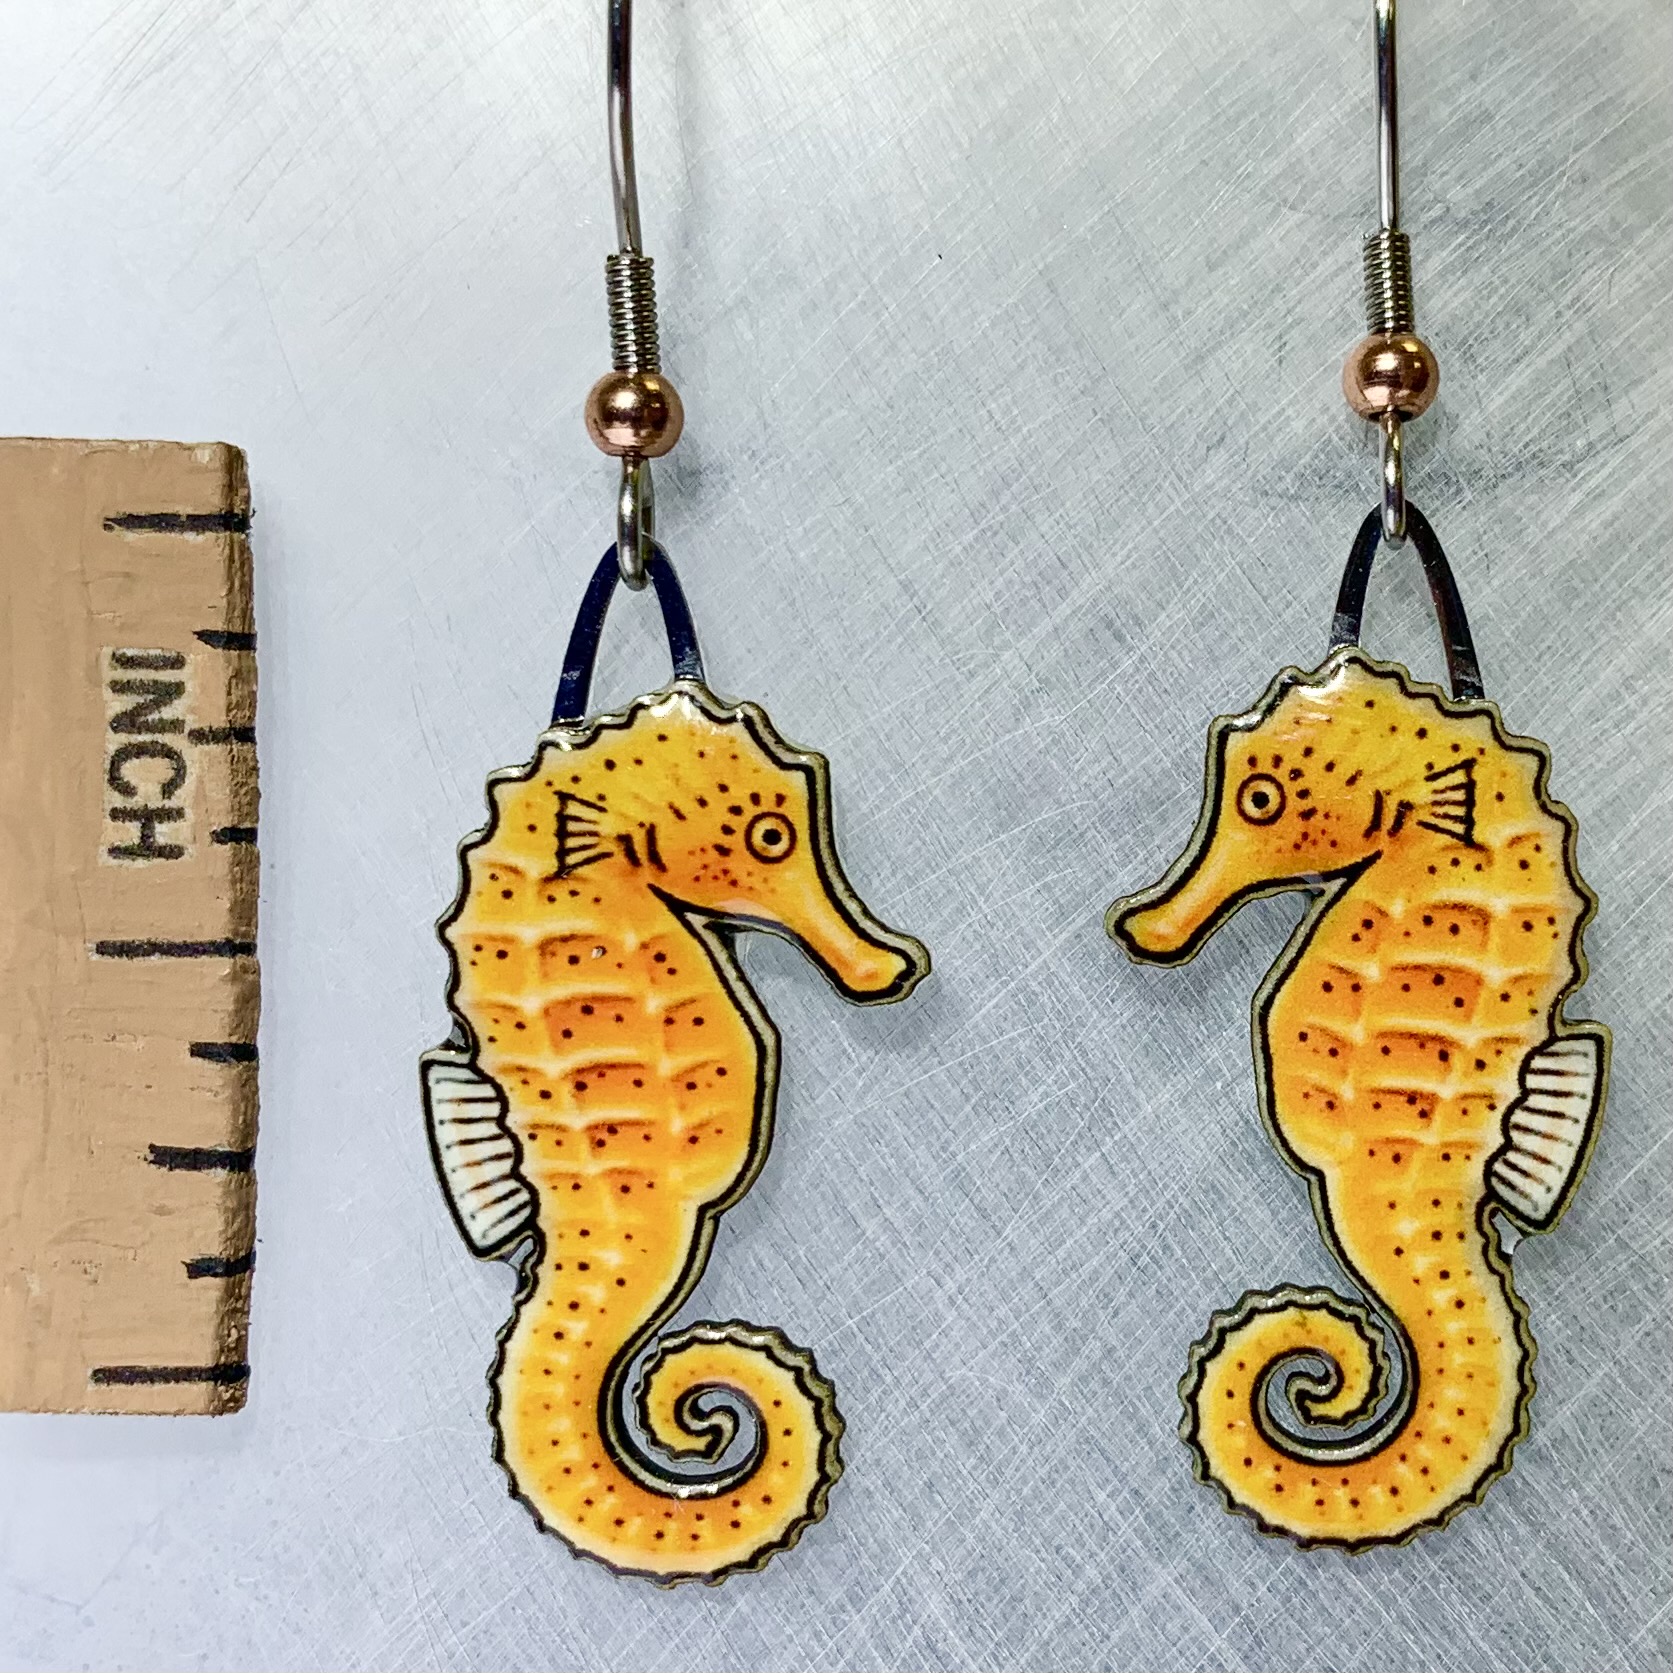 Picture shown is of 1 inch tall pair of earrings of the marine animal the Orange Seahorse.